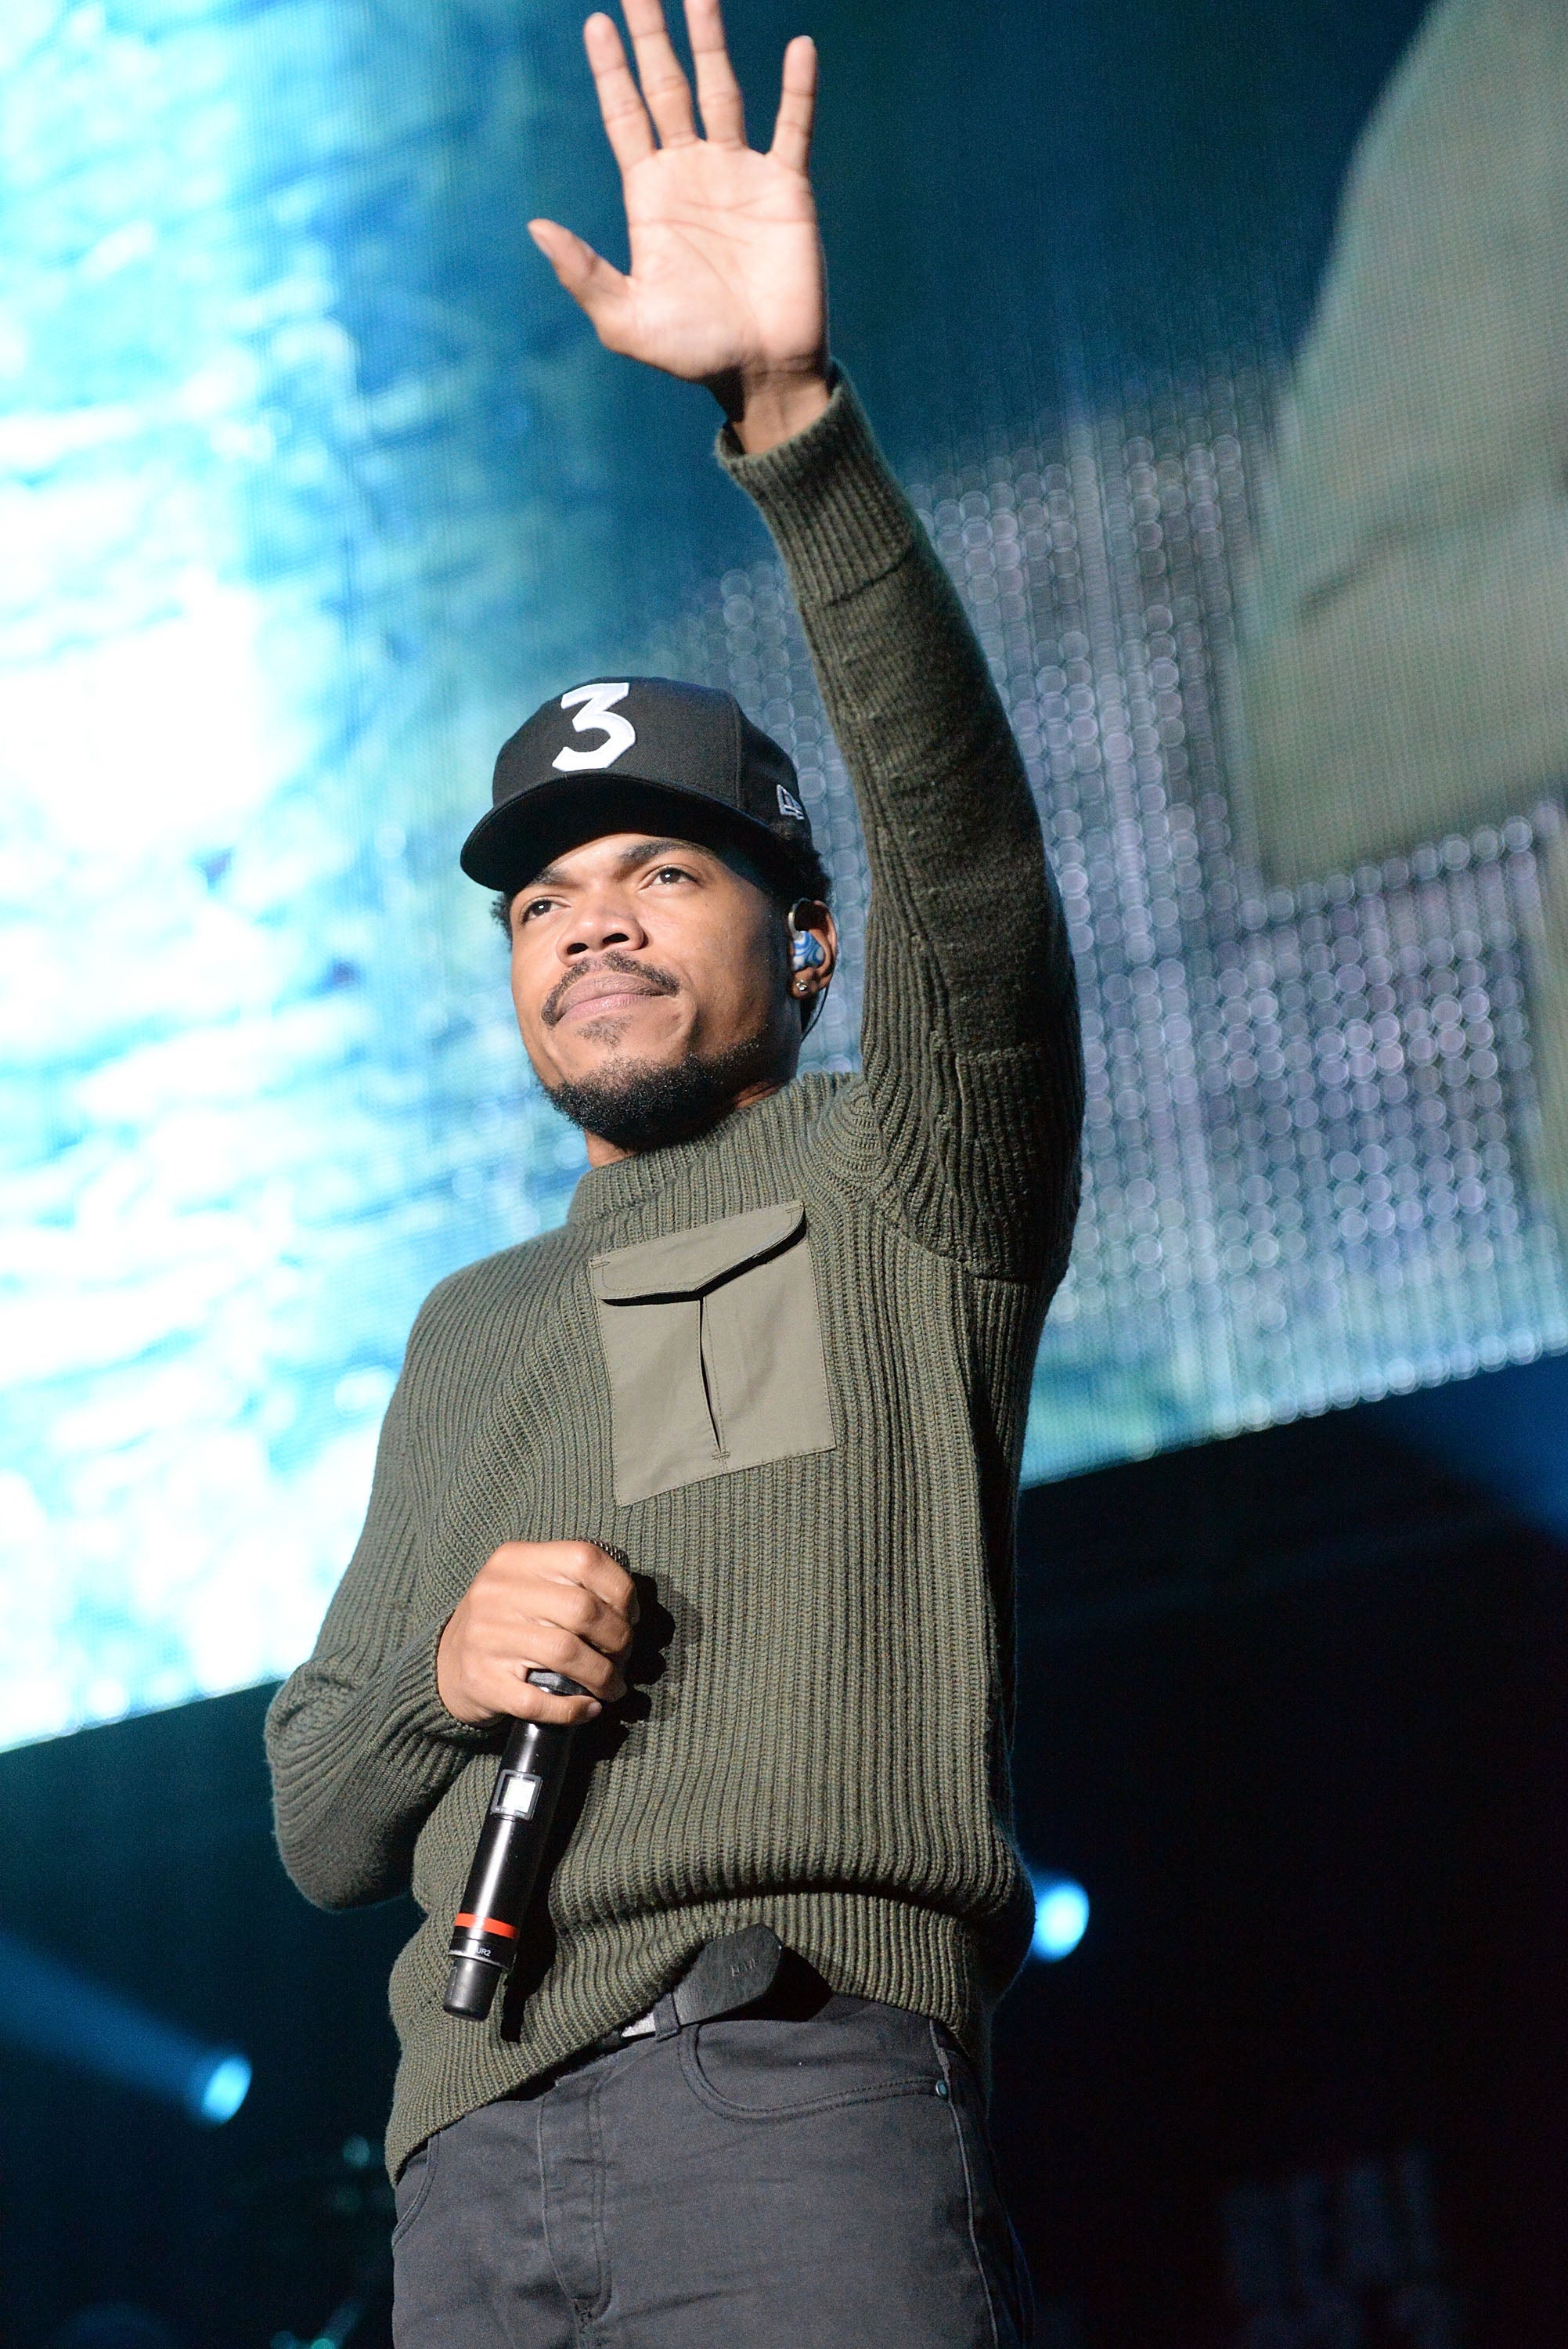 Trump, Kanye, And Being A Big Kid: 5 Things We Learned From Chance The Rapper’s New Interview